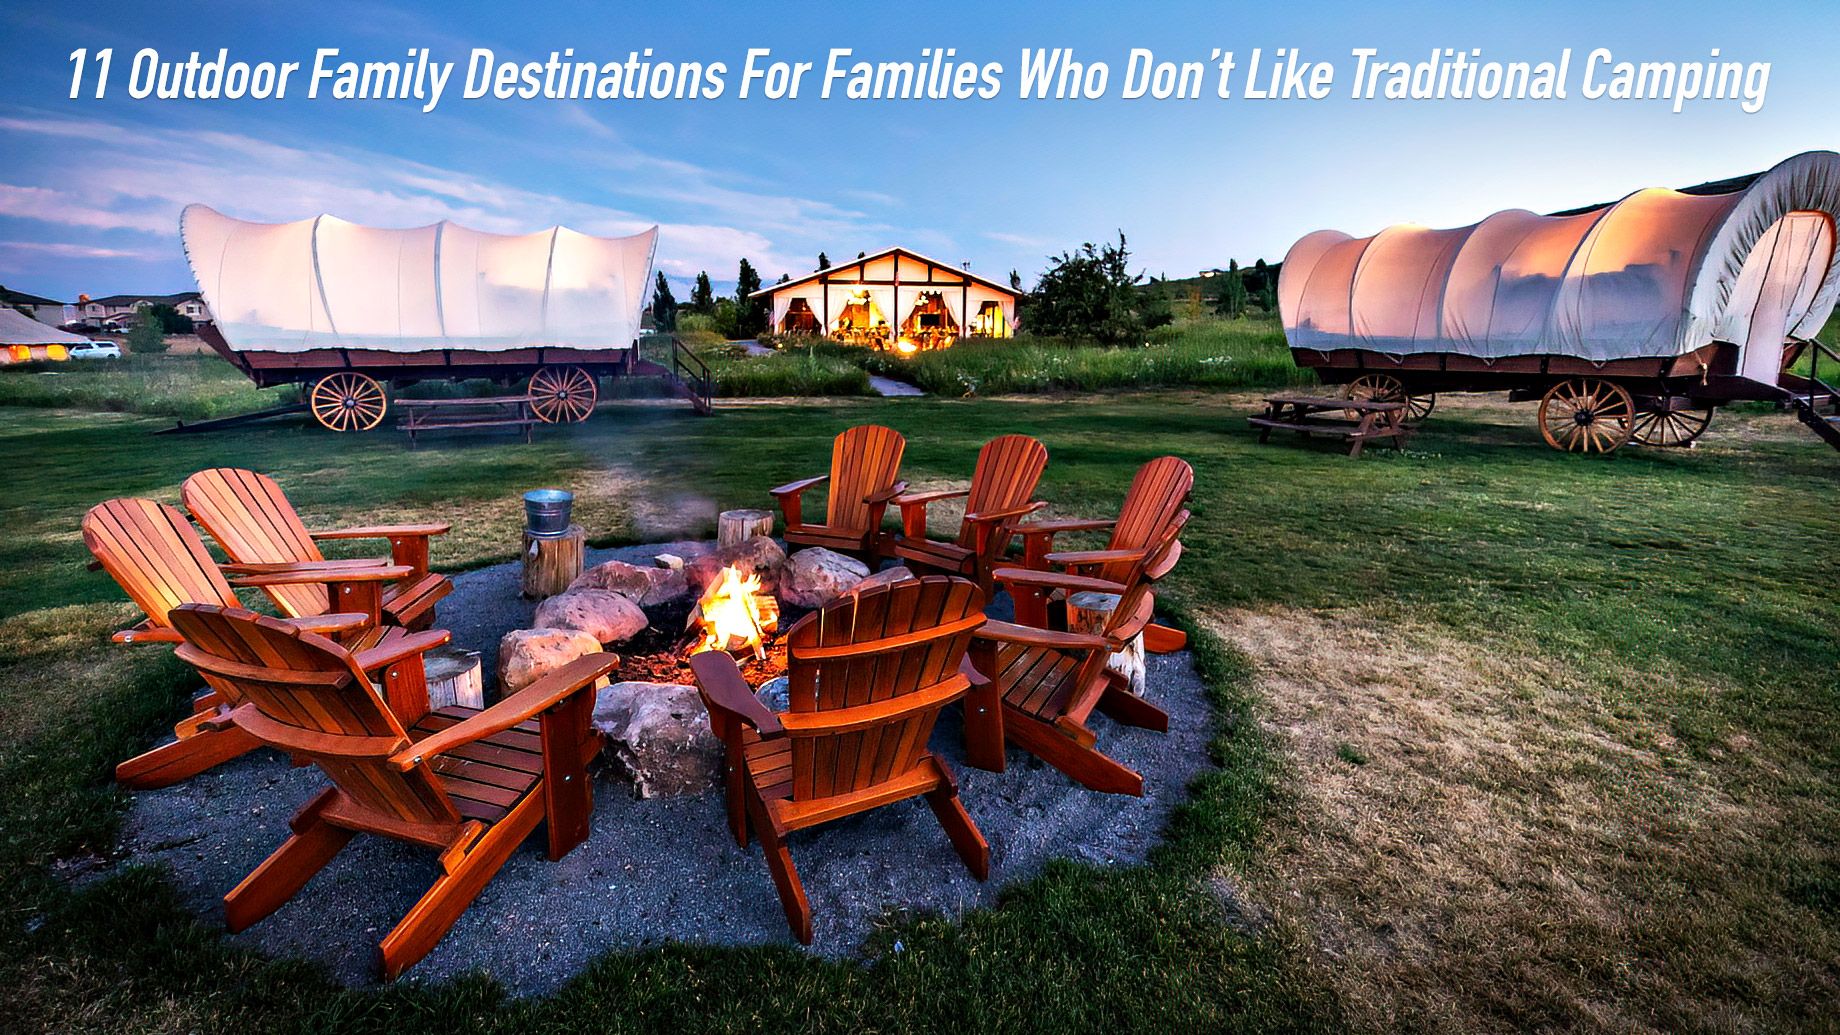 11 Outdoor Family Destinations For Families Who Don’t Like Traditional Camping